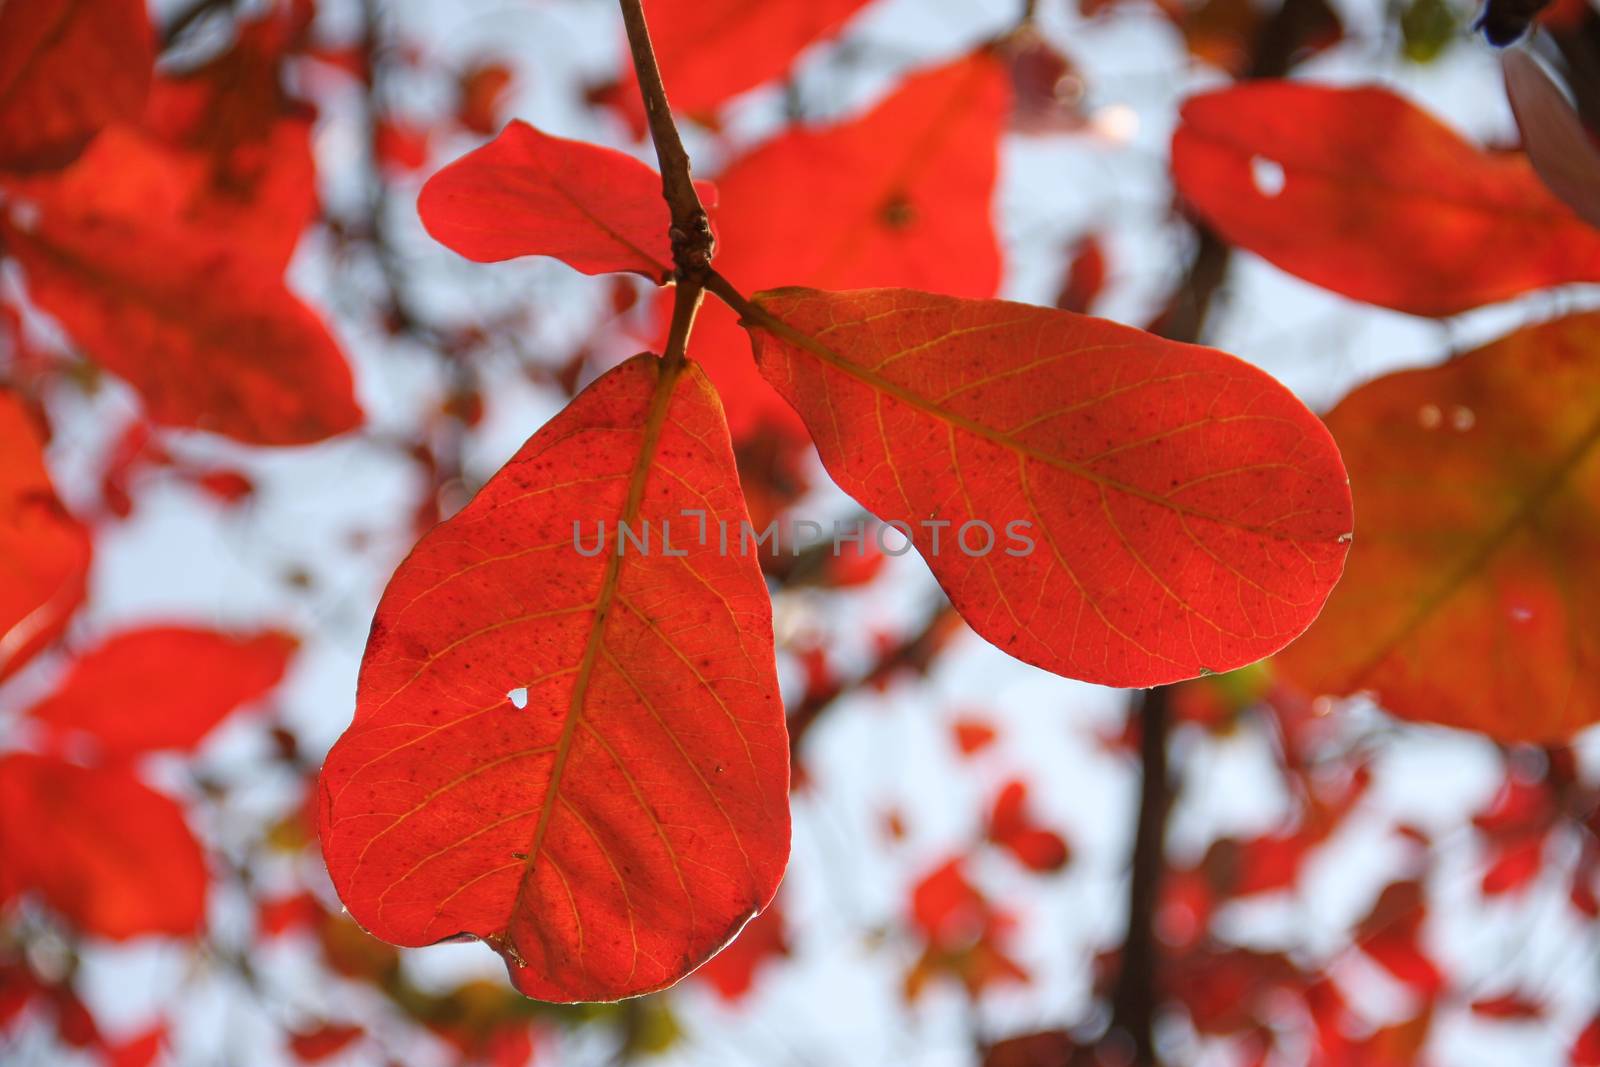 red bengal almond leaves with blue sky